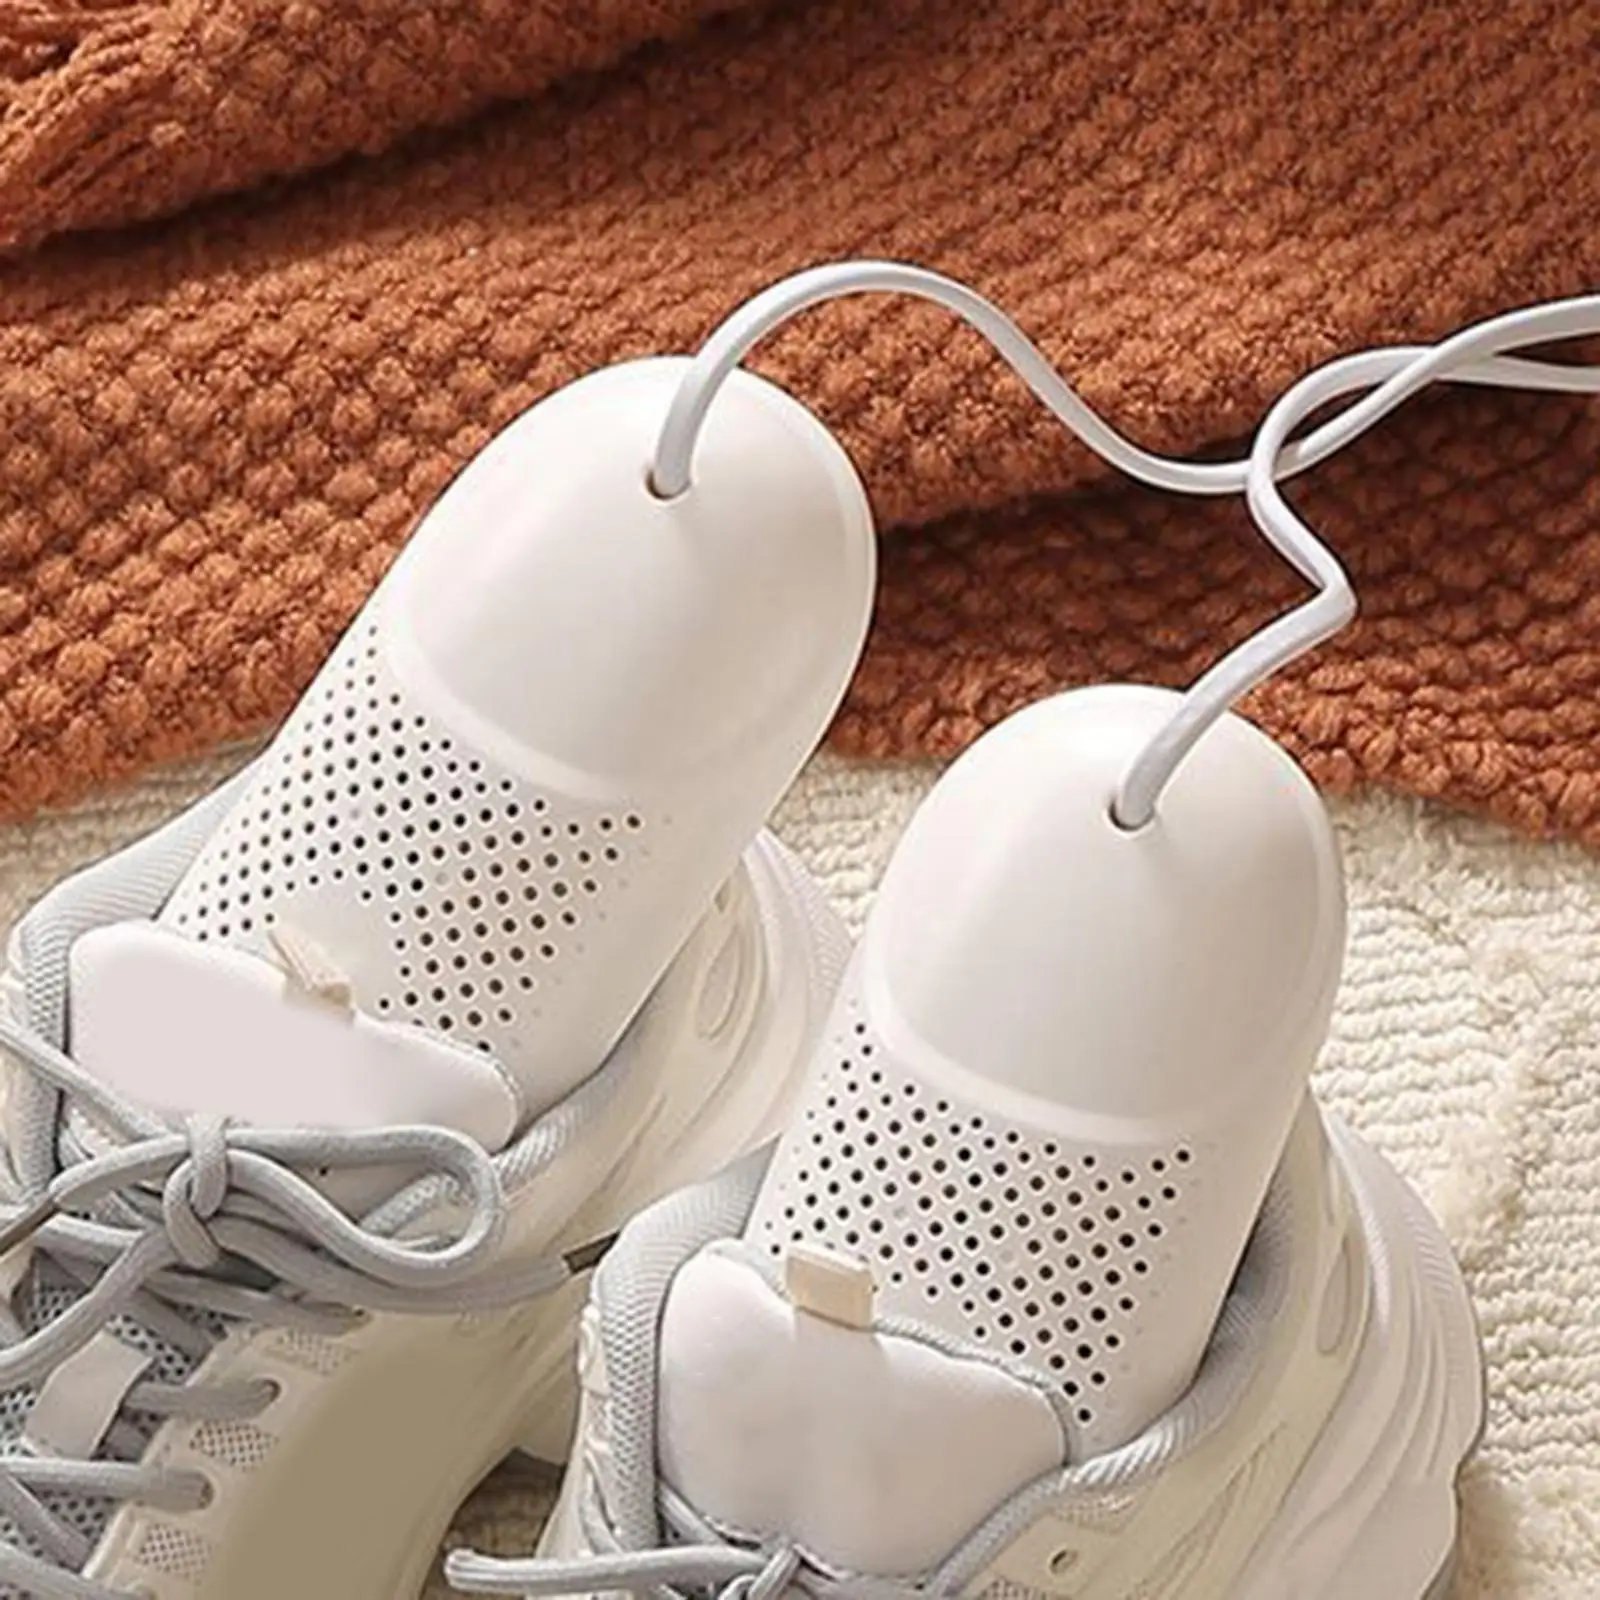 Portable Shoe Dryer Odor Deodorant Heater Warmer Boot Dehumidify Device Shoes Drier Foot Protector Electric for Household Family